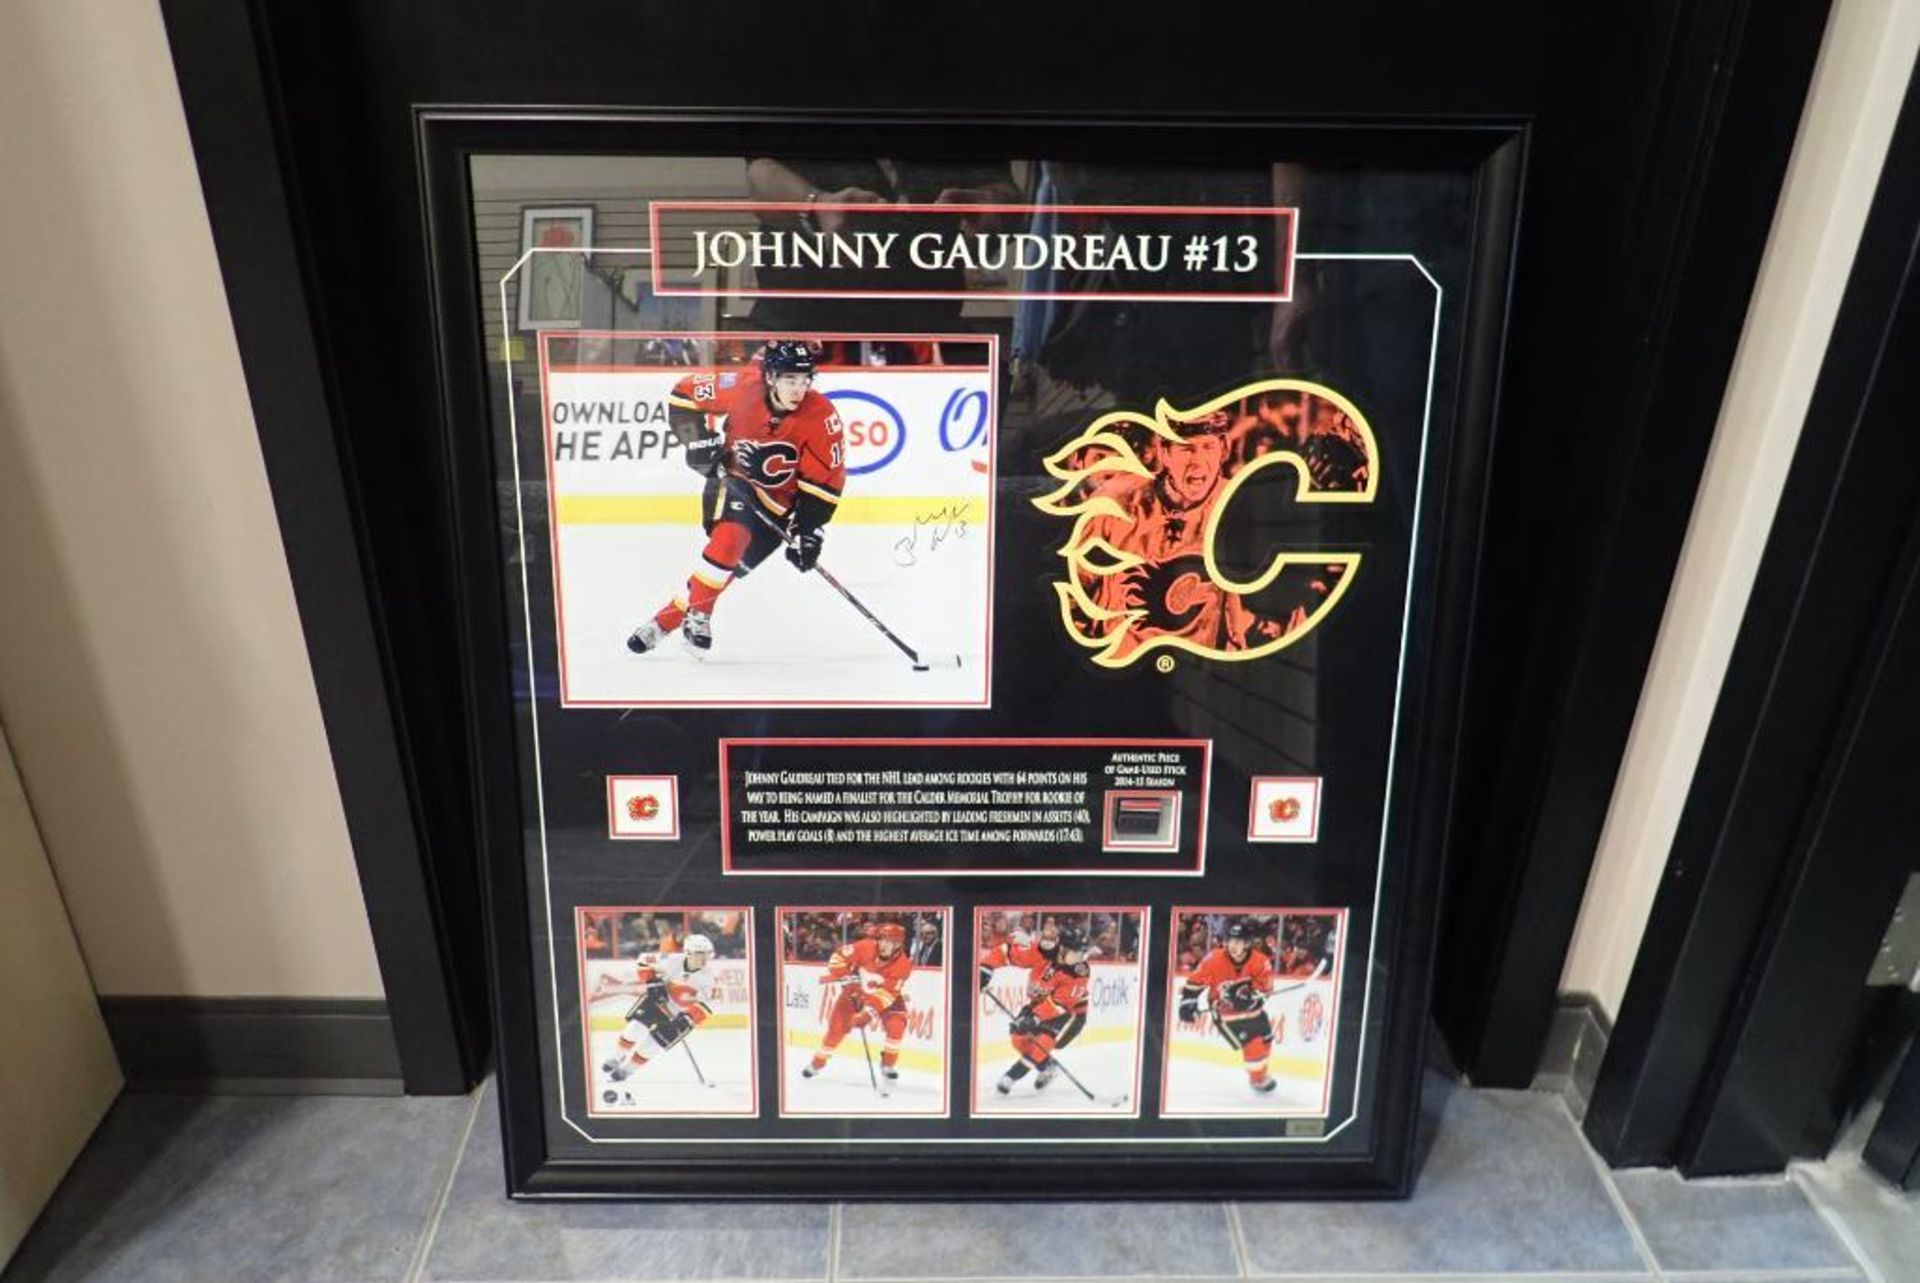 Flames Authentic Signed Johnny Gaudreau Framed Photo Collage.